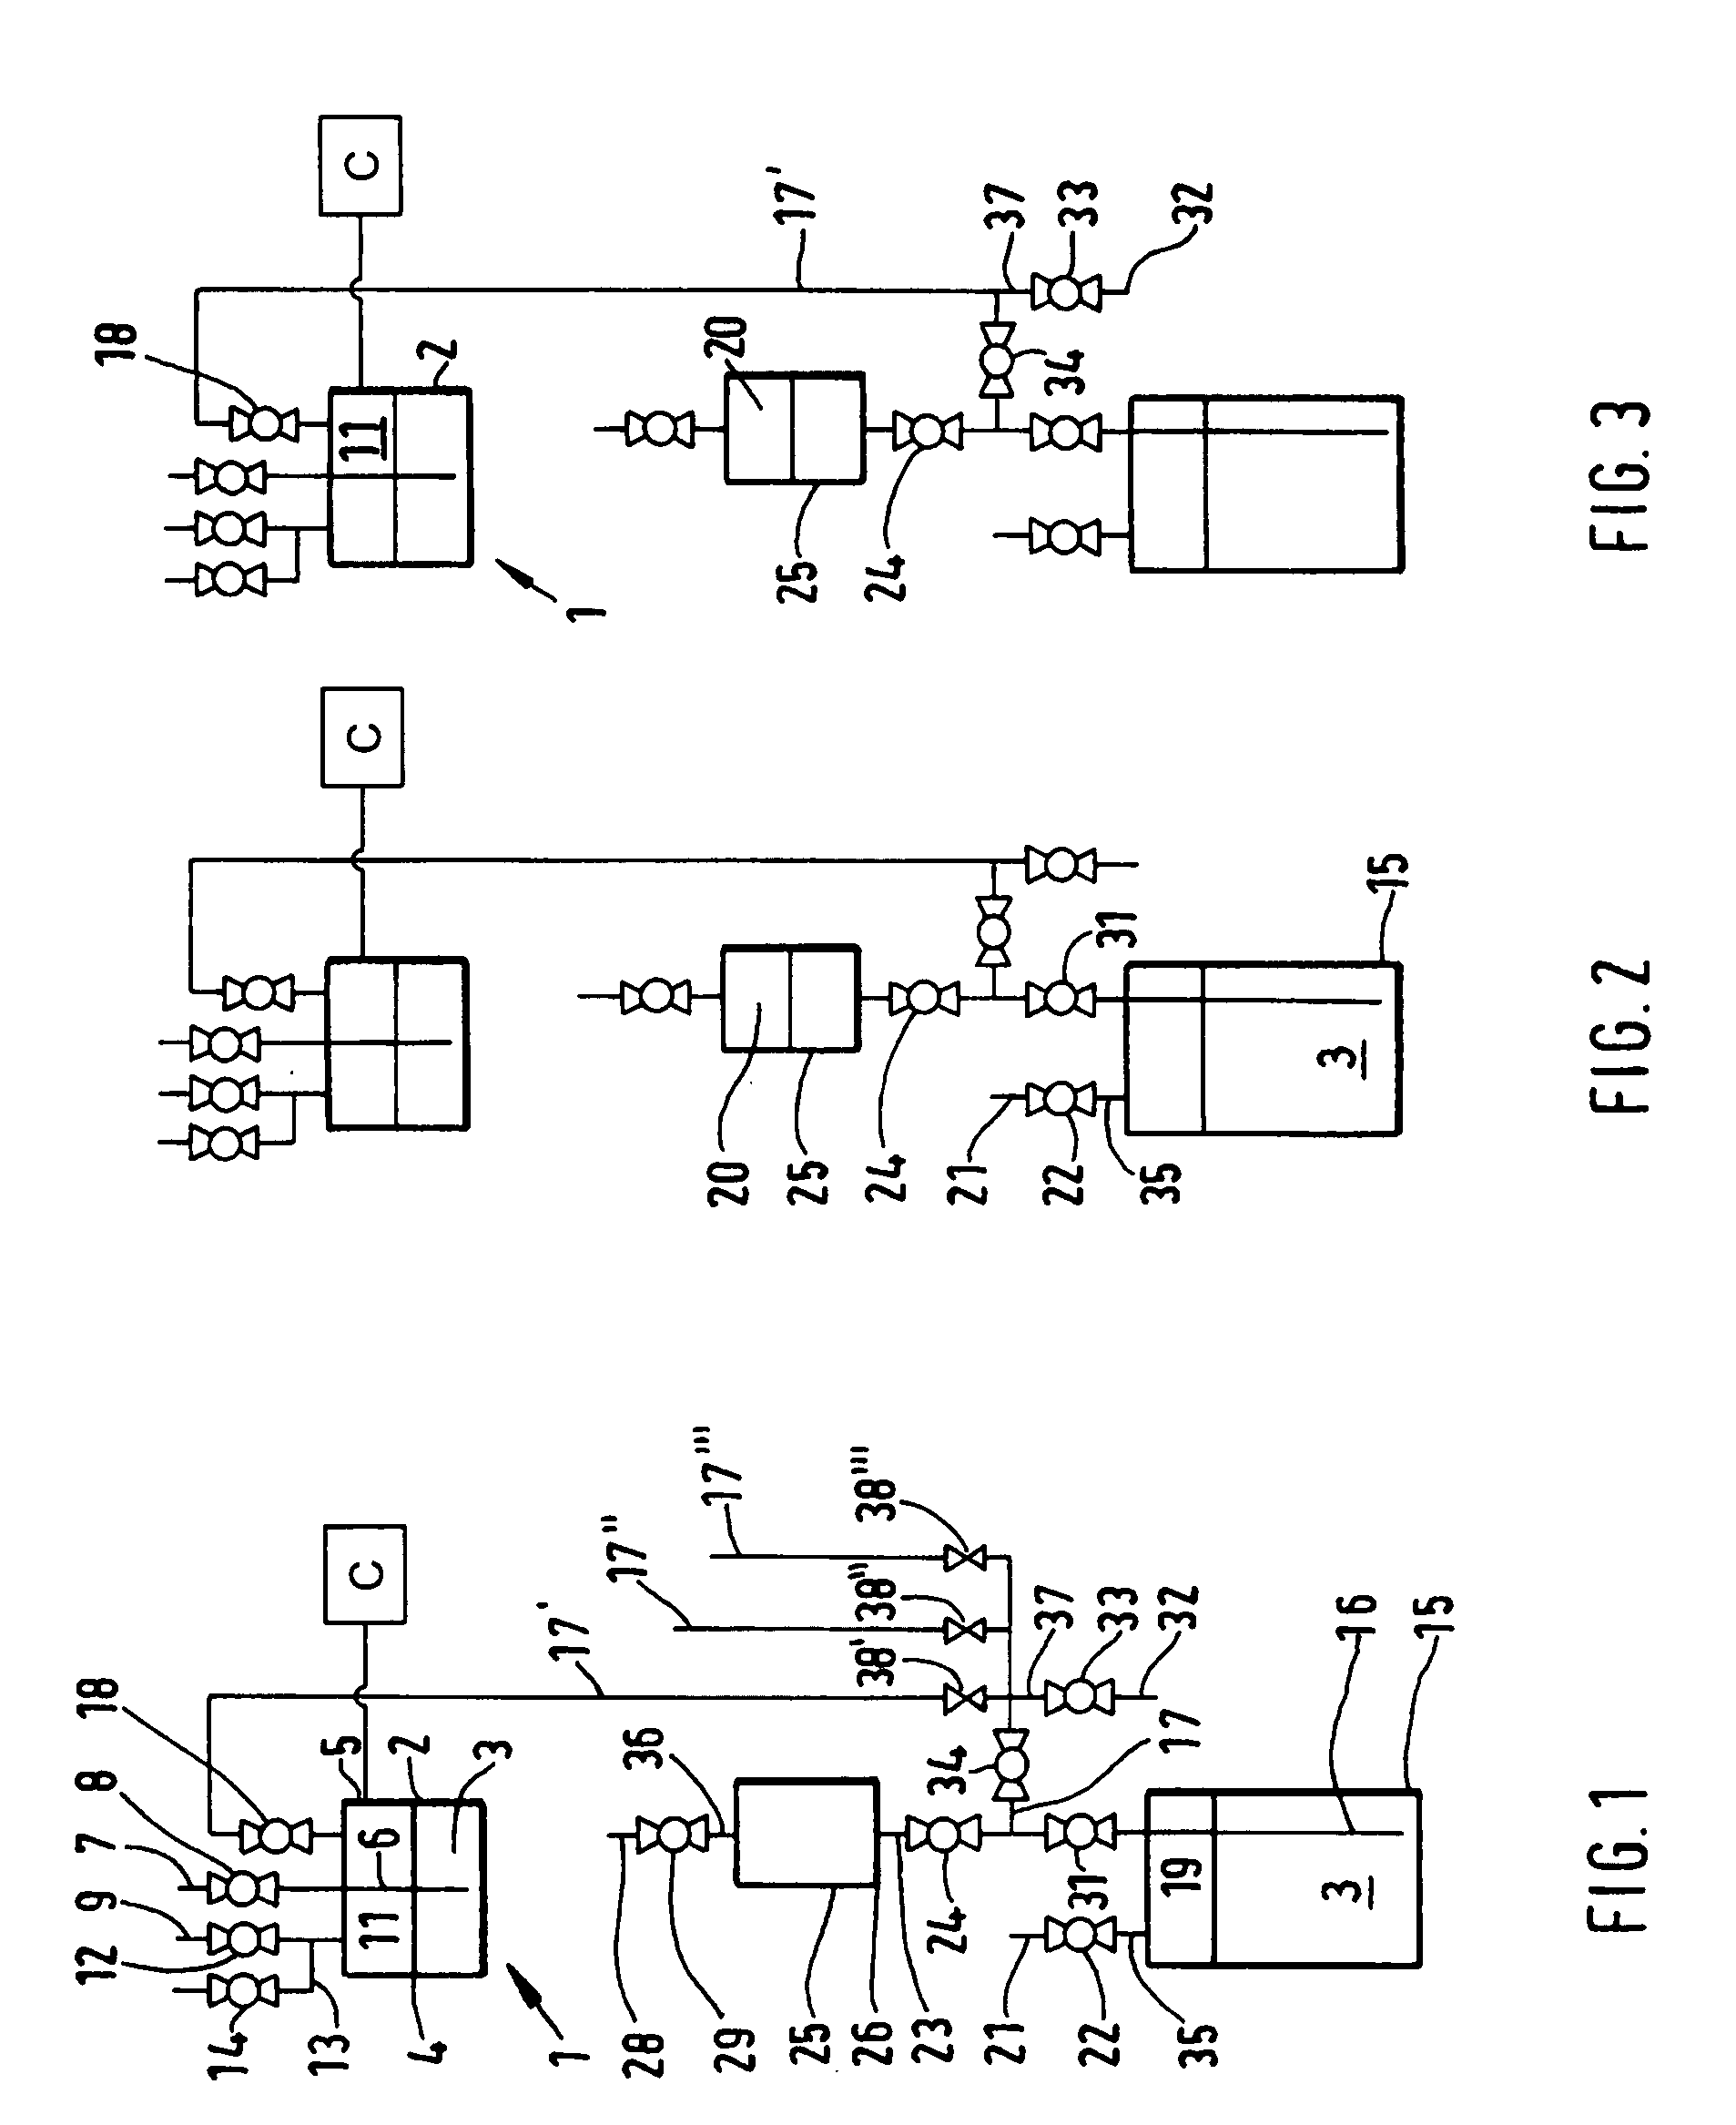 Apparatus and process for refilling a bubbler